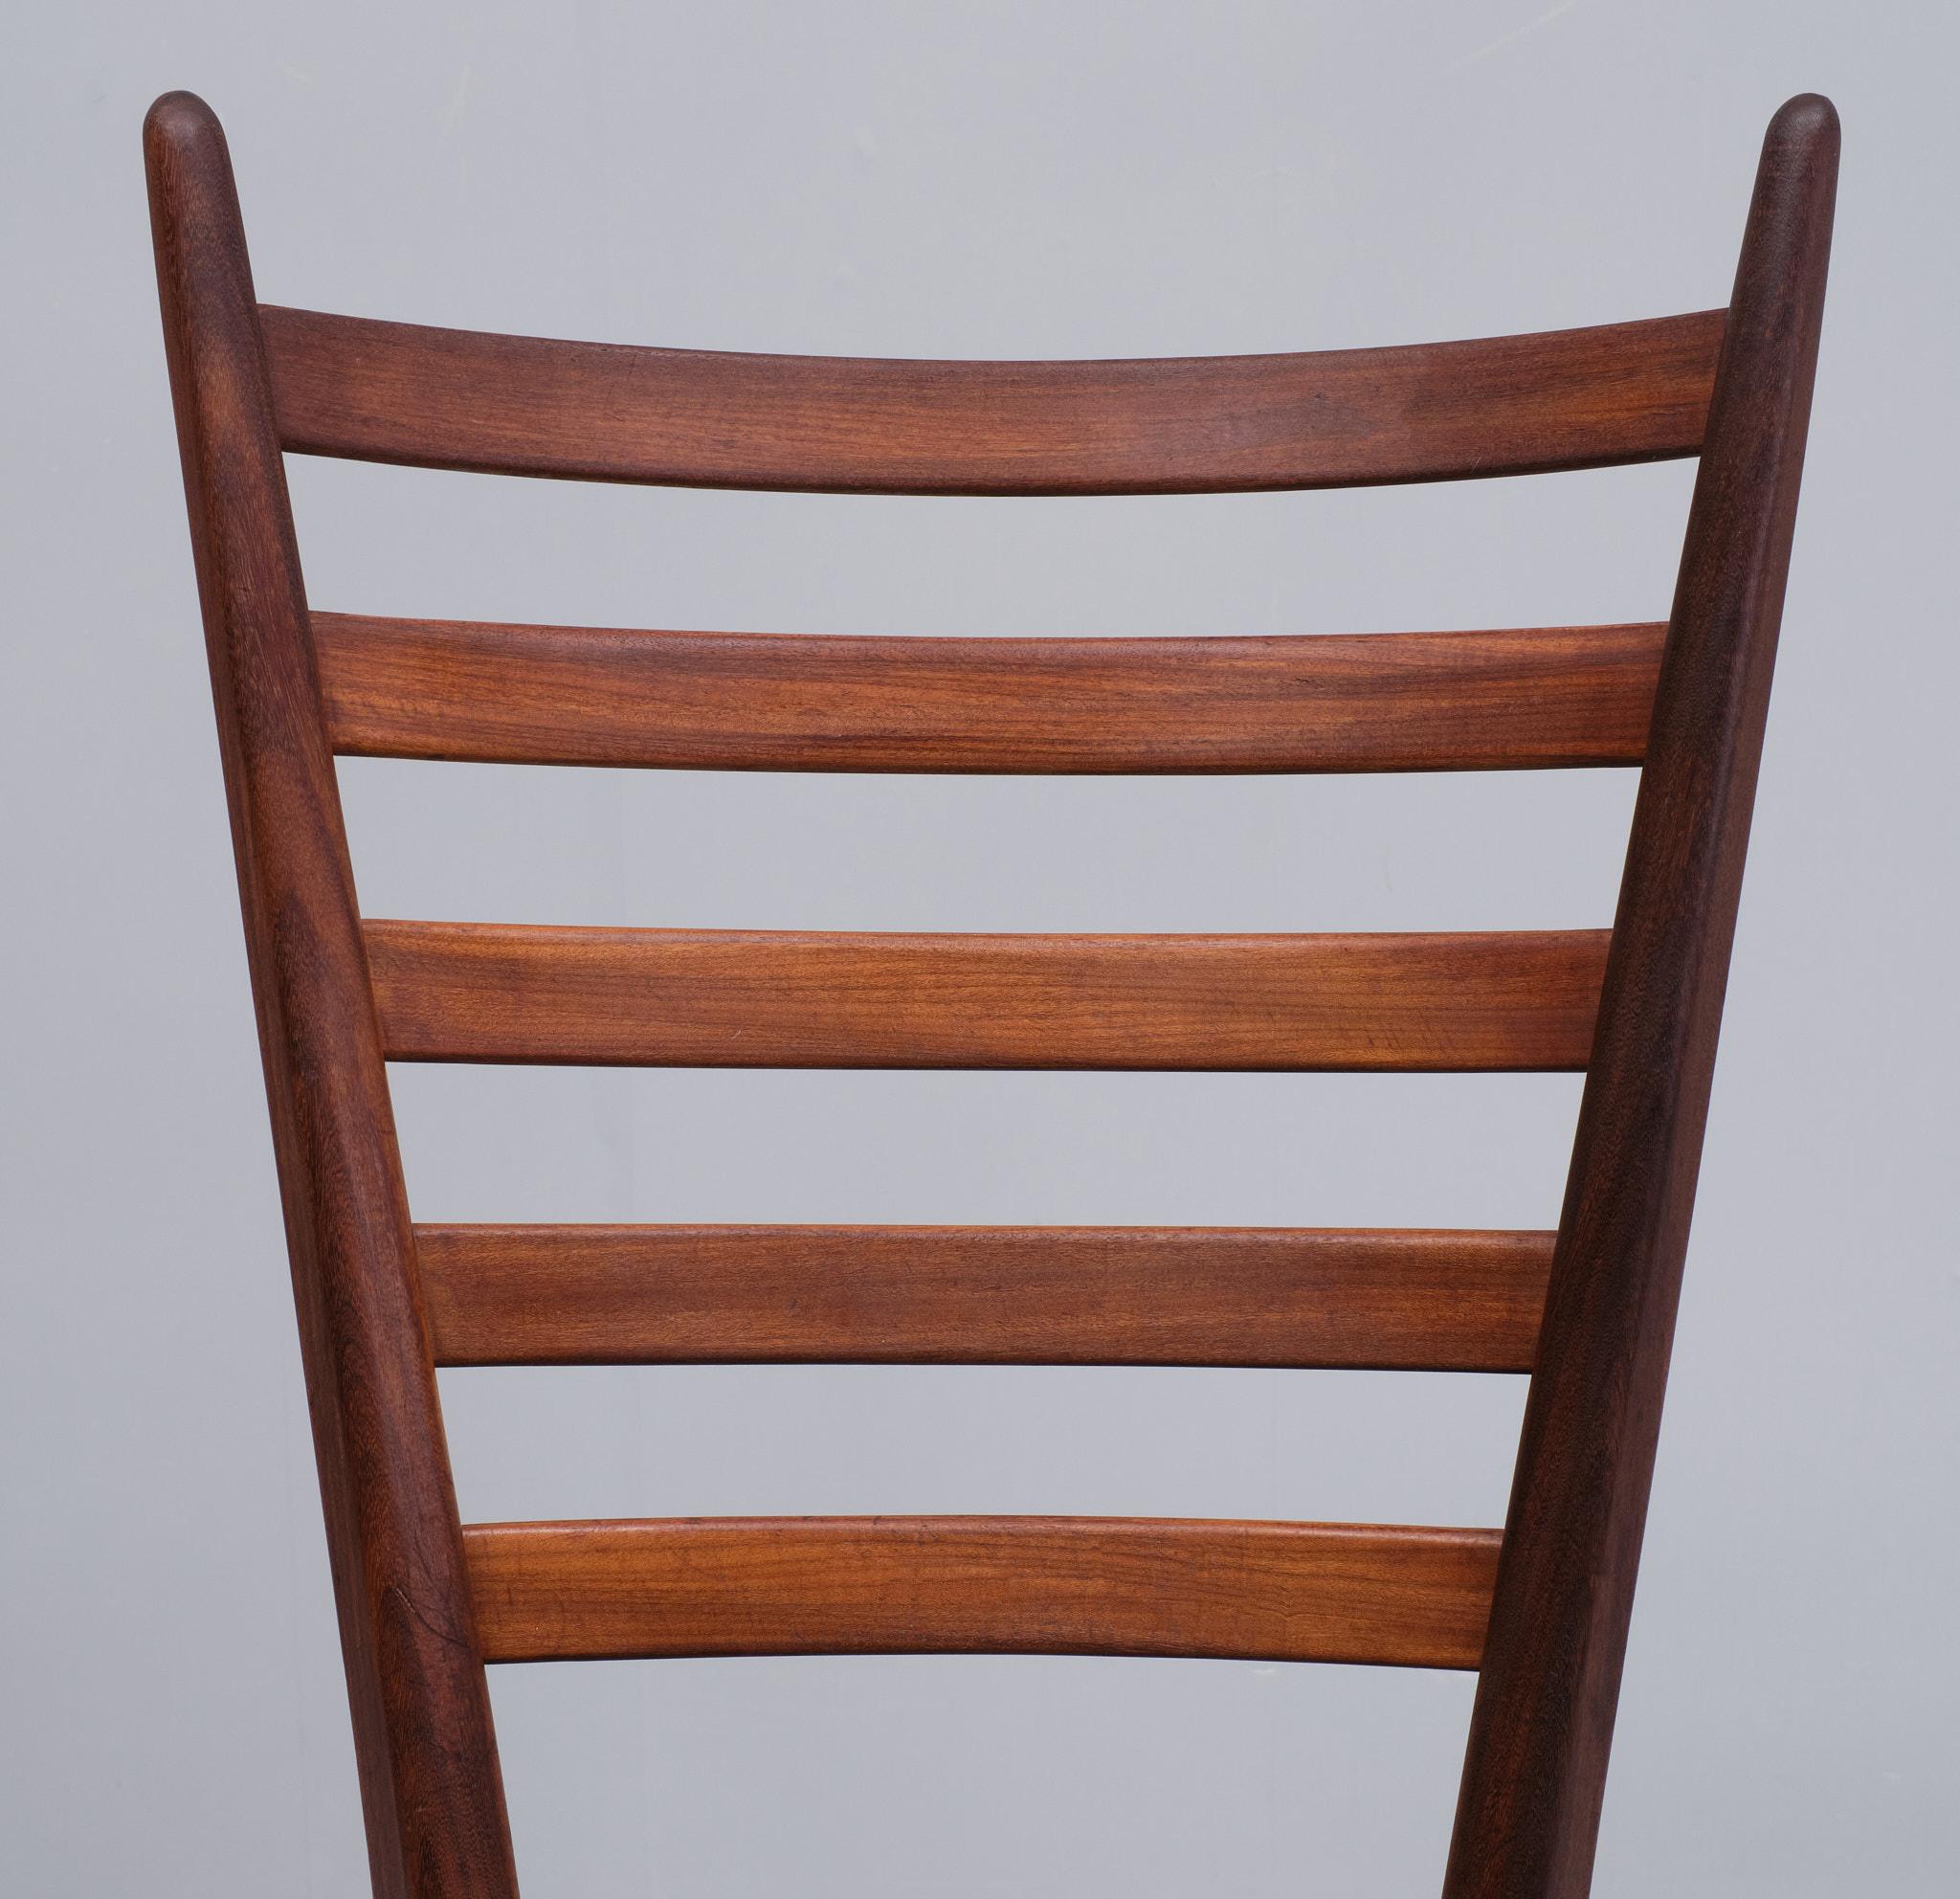 Teak Cees Braakman  curved ladder chairs 1950s  Holland  For Sale